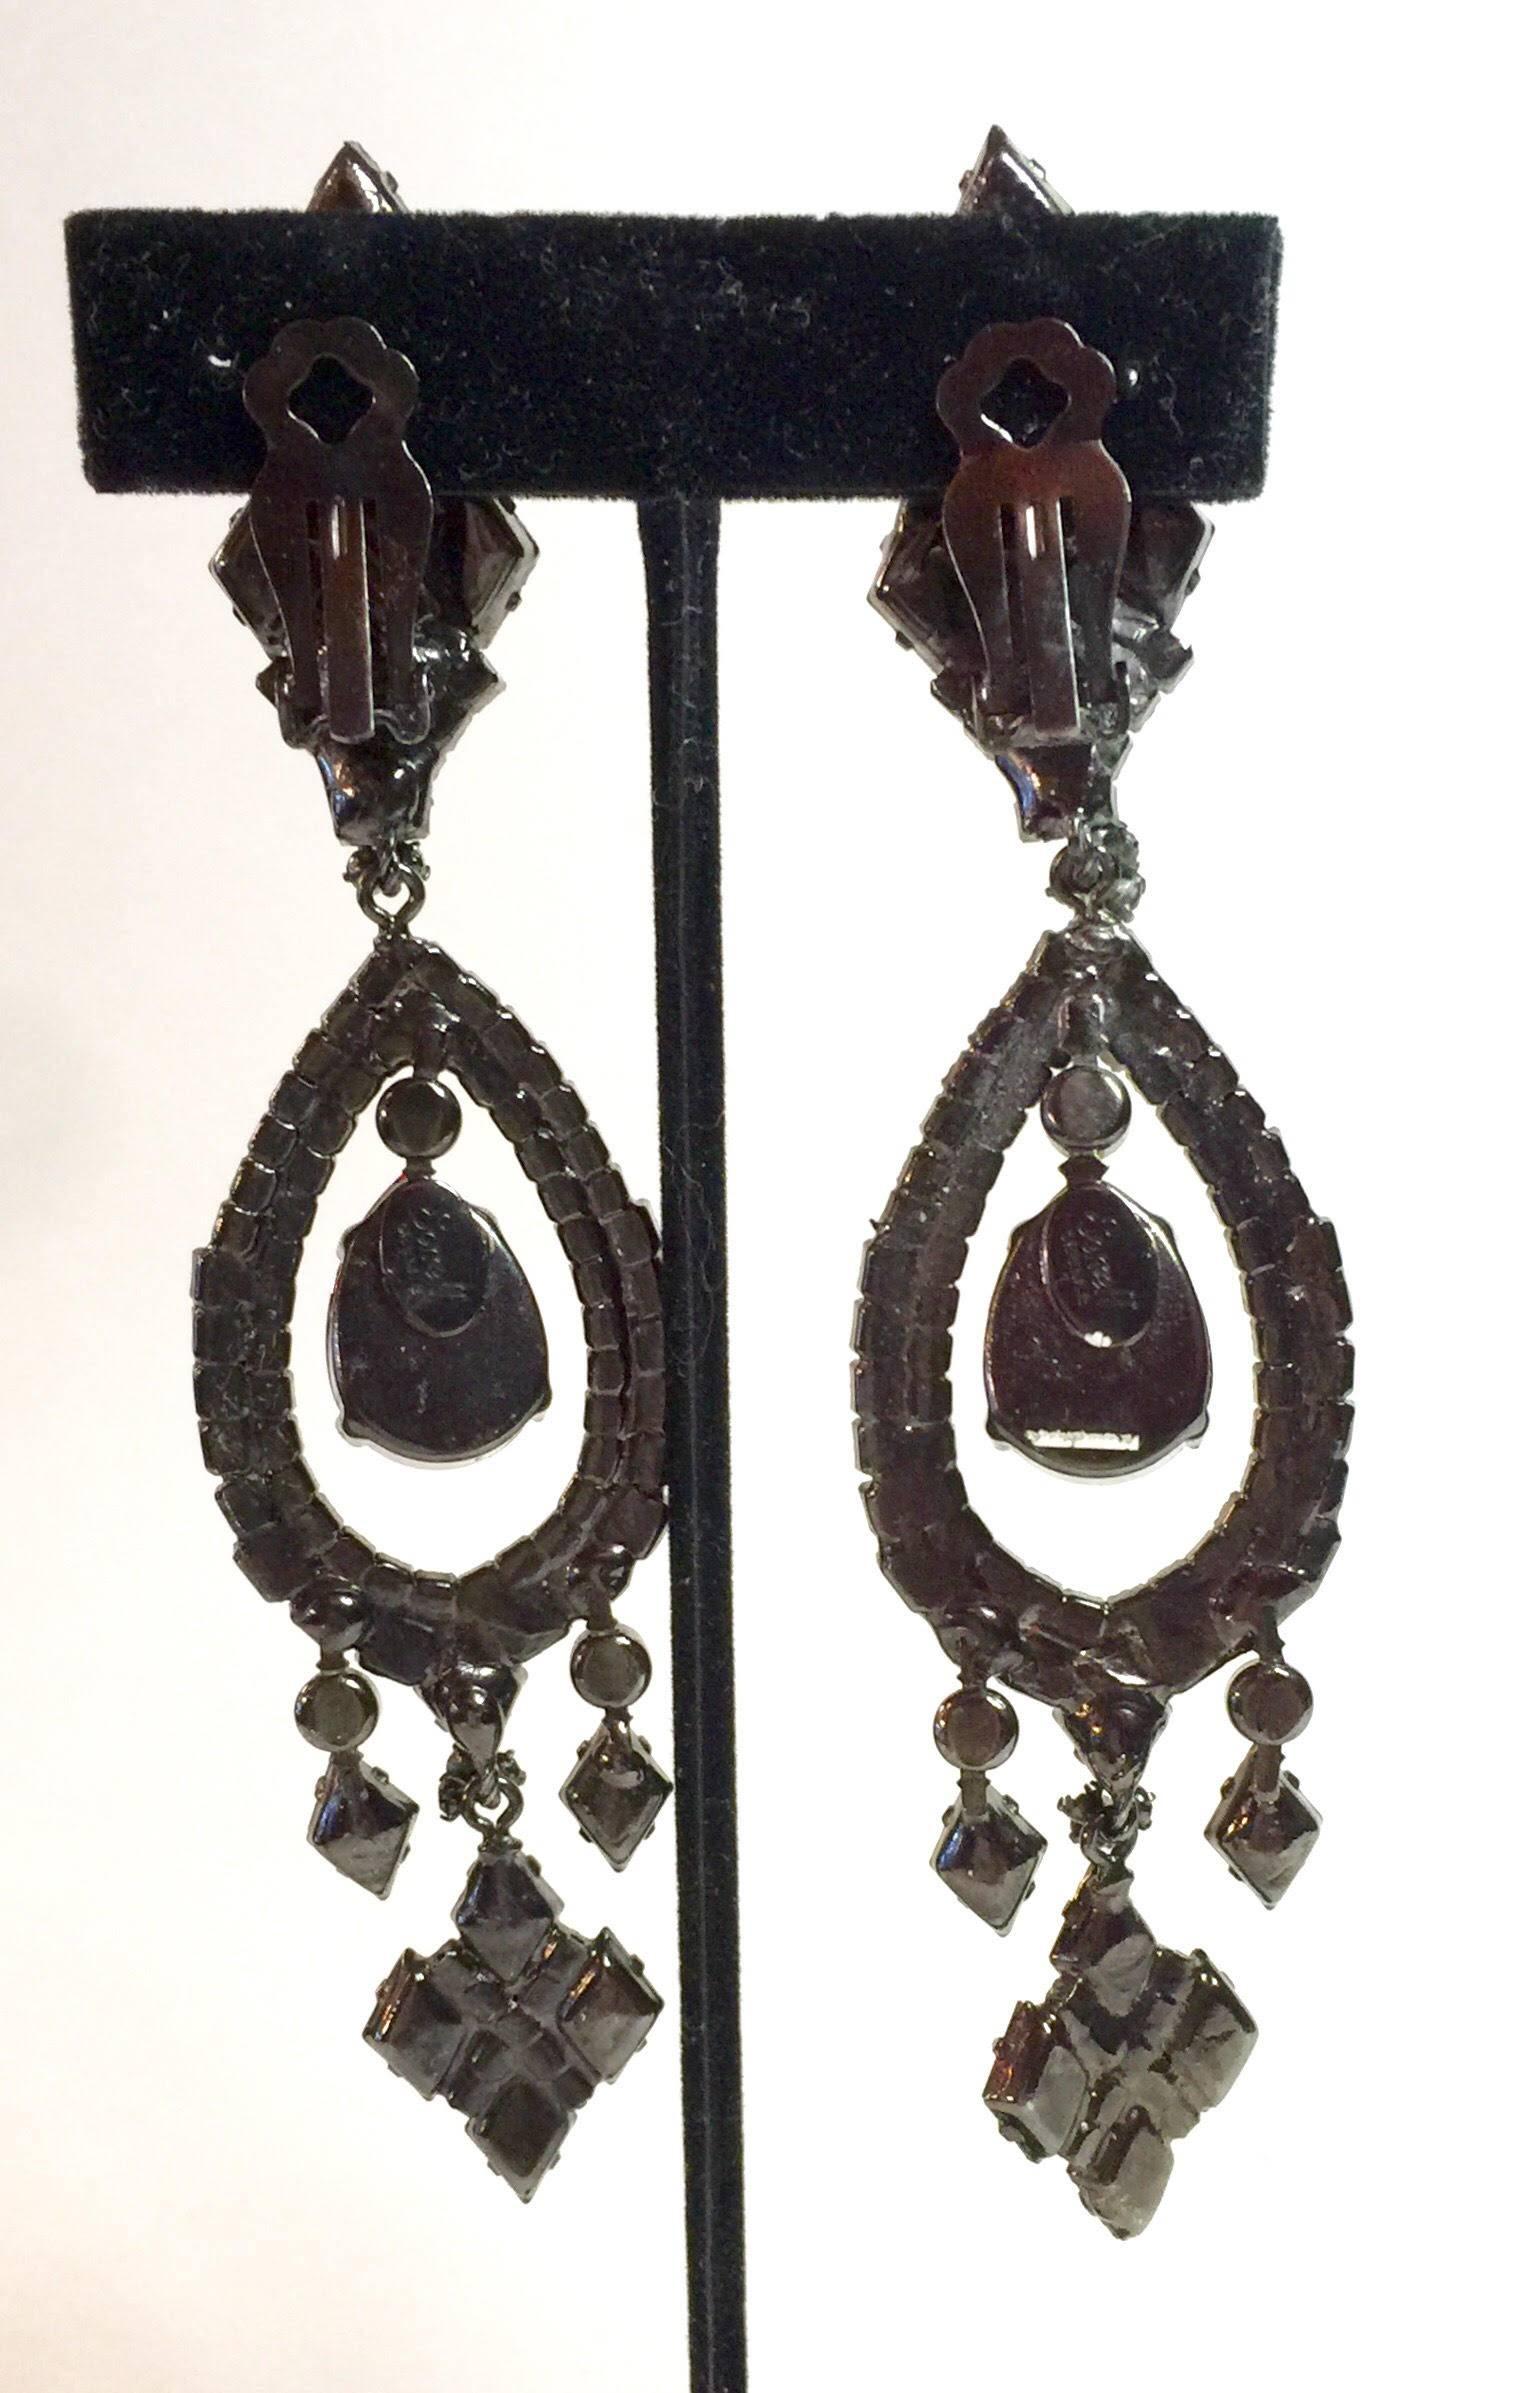 These magnificent exquisitely long and linear clip on drop earrings by Robert Sorrell original are of high style and overpoweringly glamorous allure. Almost 5